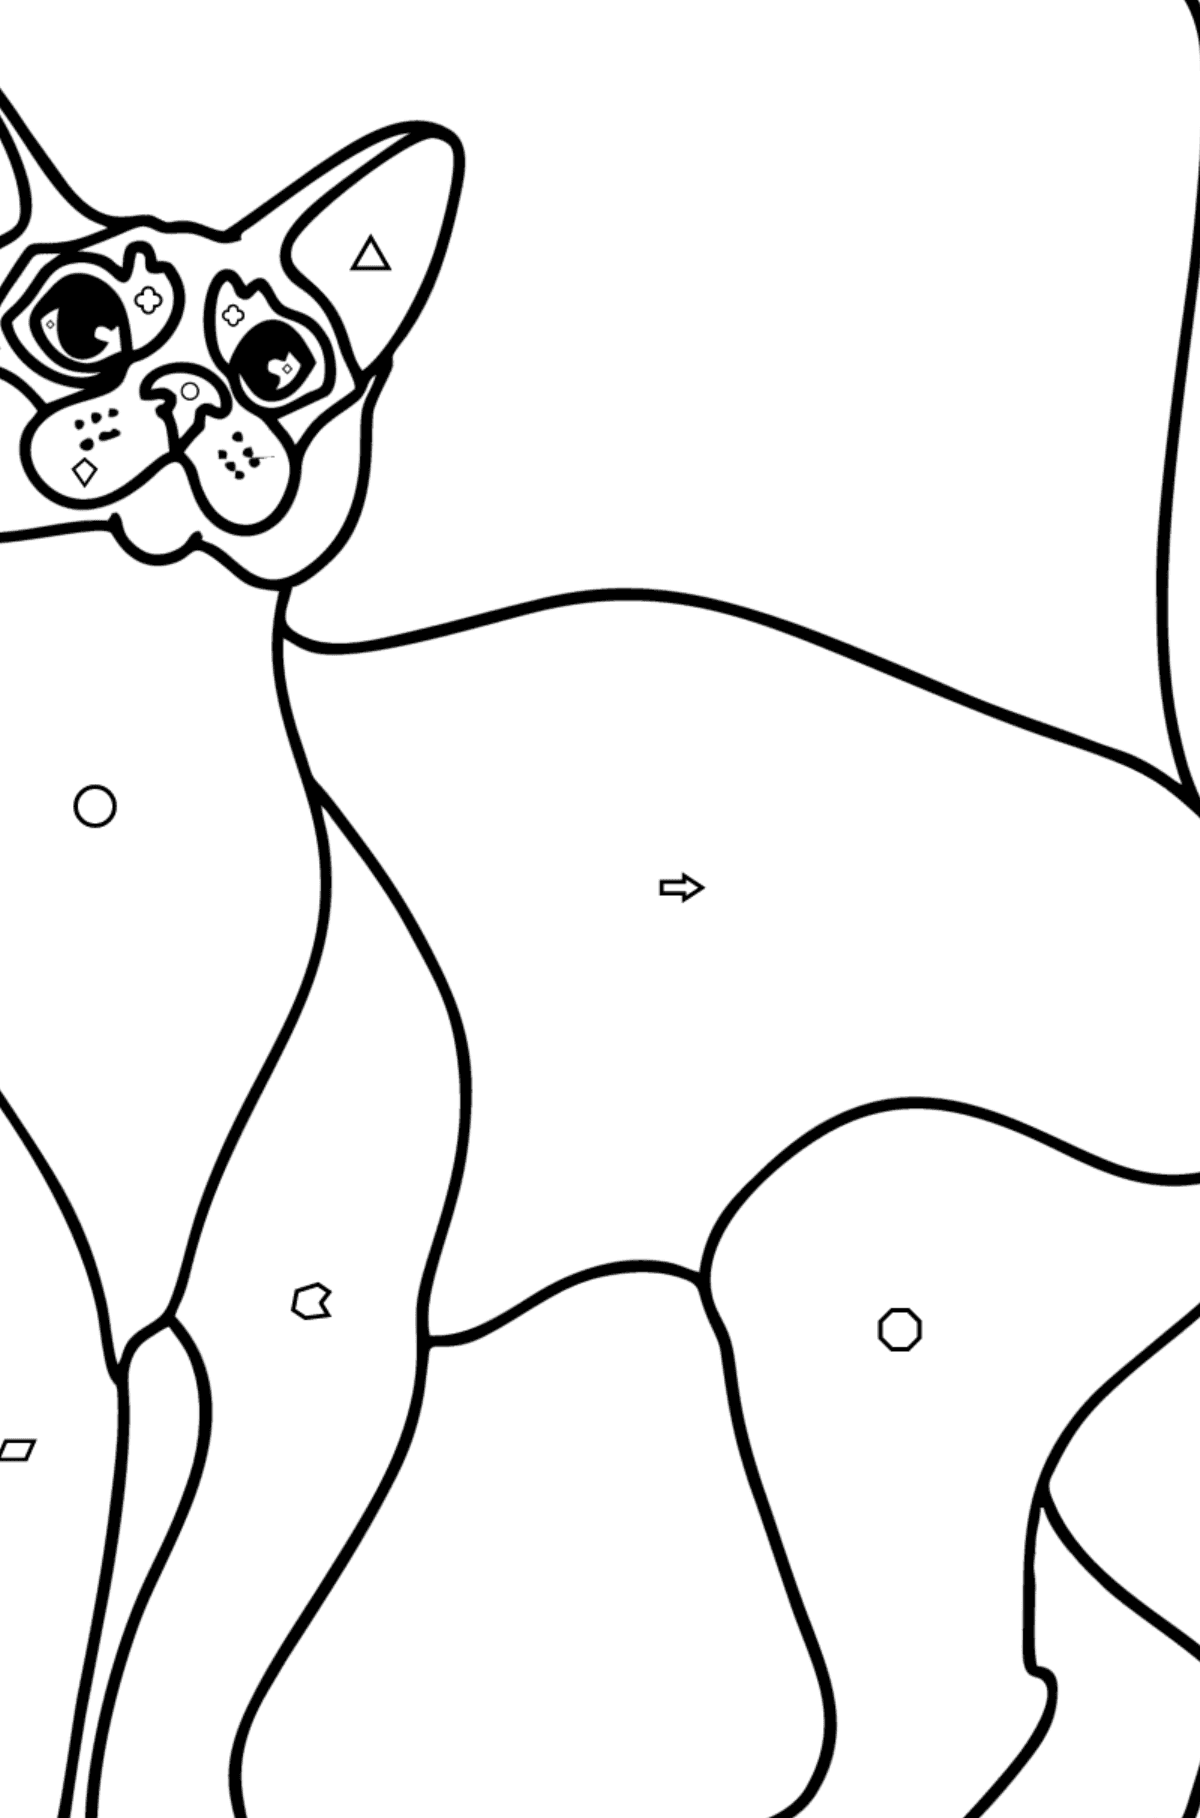 Abyssinian Cat coloring page - Coloring by Geometric Shapes for Kids